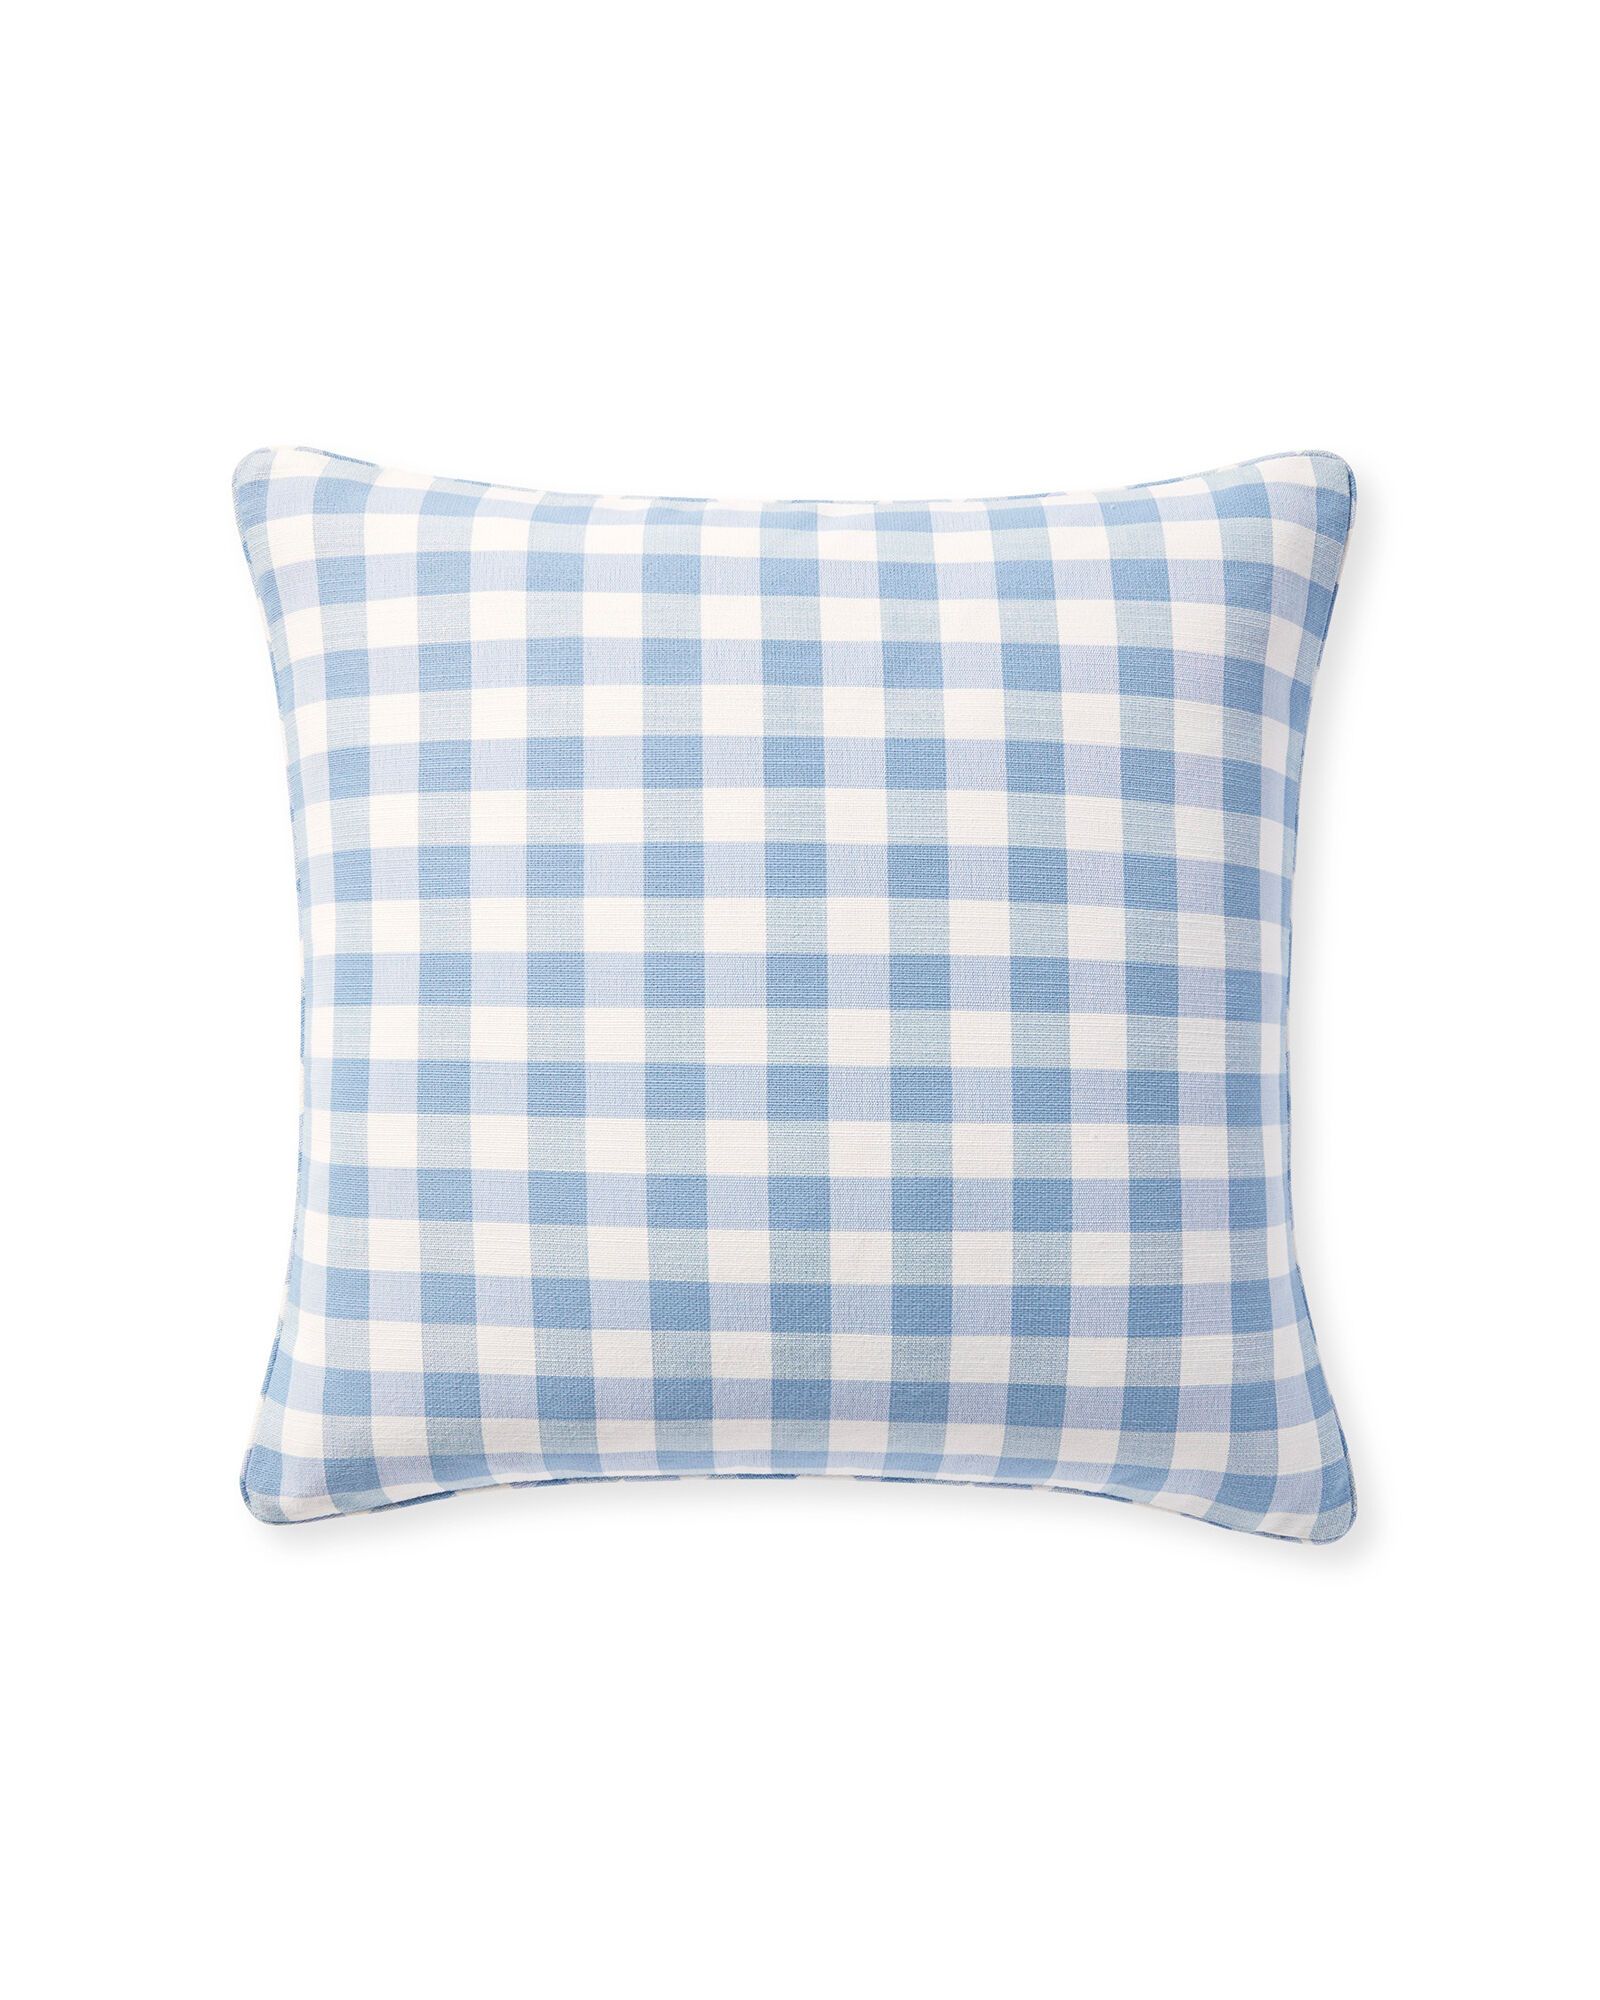 Perennials Classic Gingham Pillow | Serena and Lily